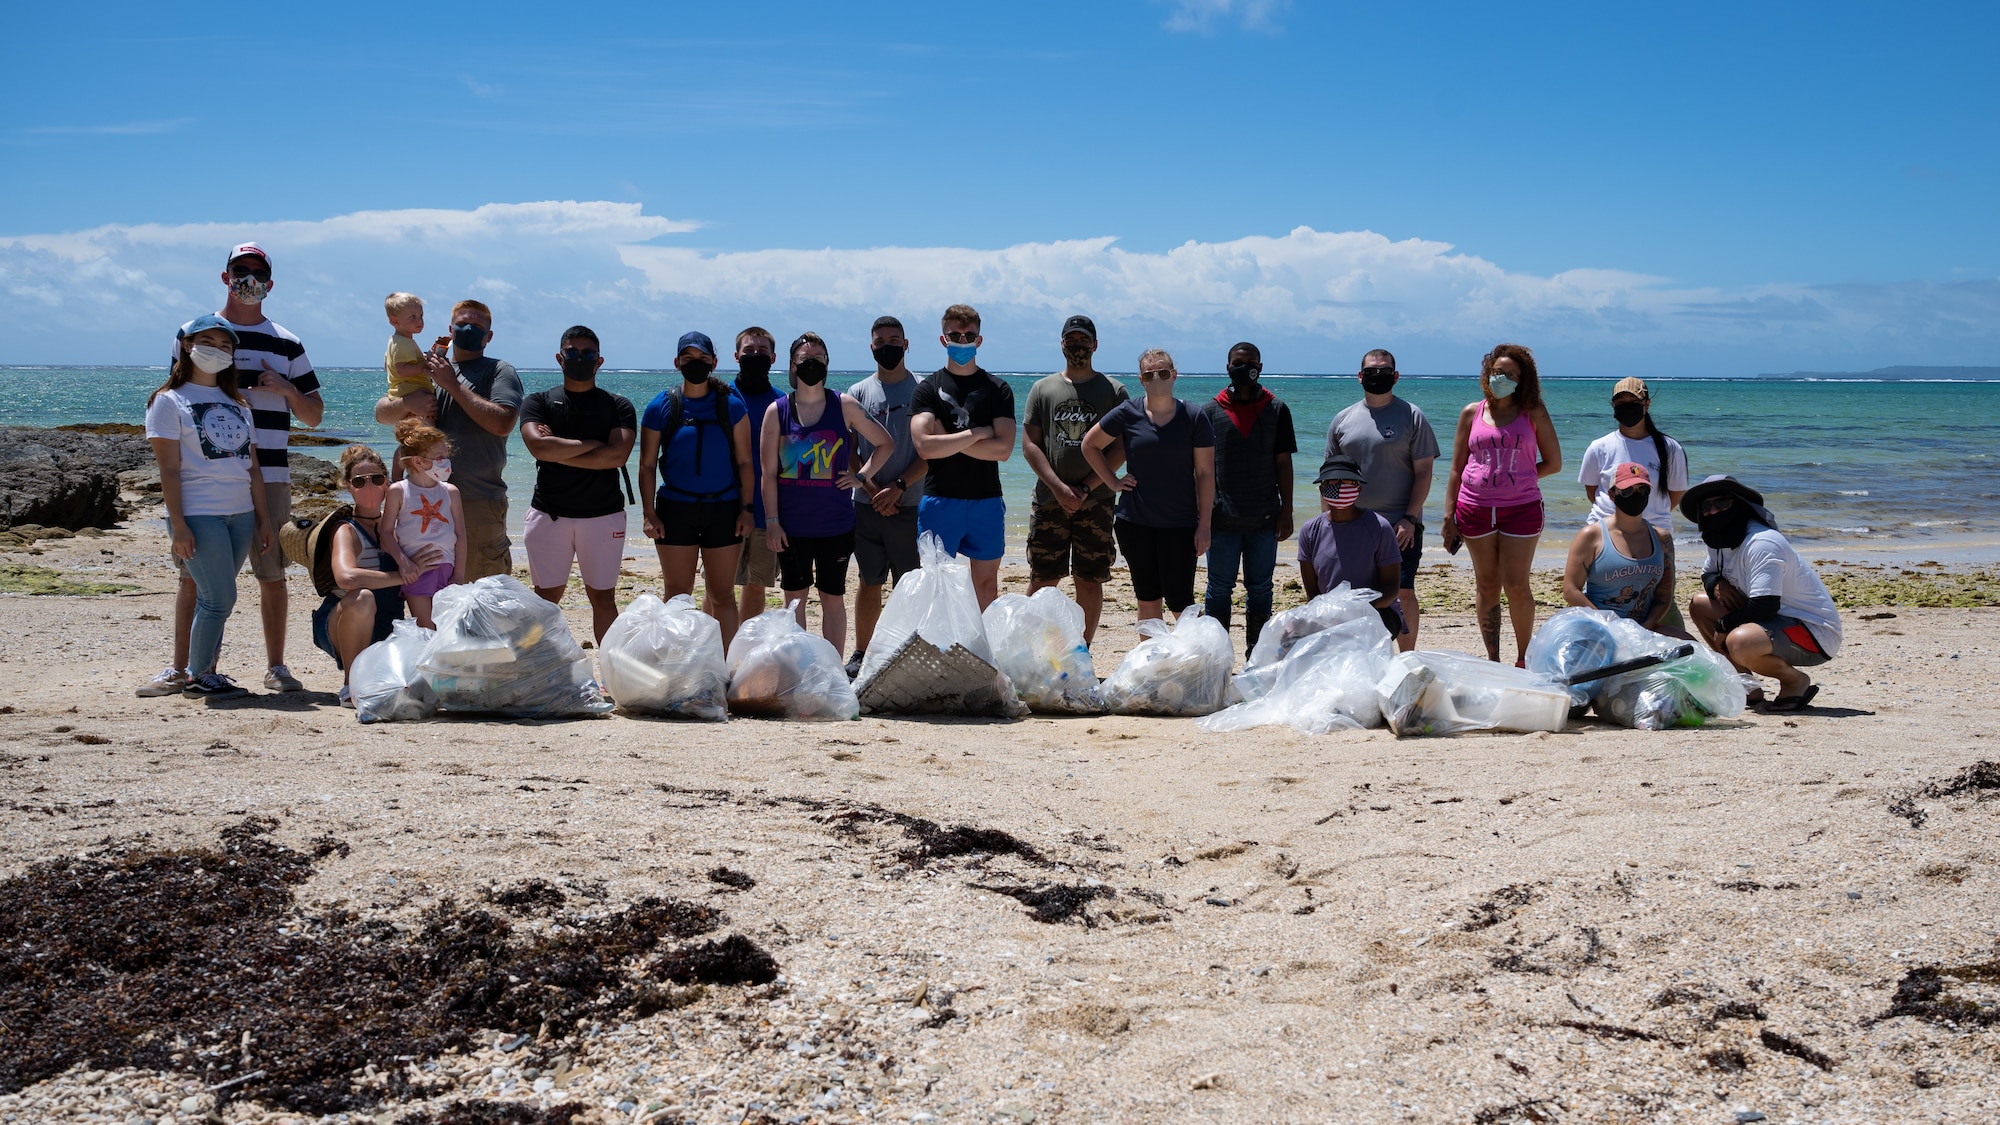 U.S. Air Force Airmen and families from Kadena Air Base come together for a group photo after a volunteer beach clean-up at Seaglass Beach on Okinawa, Japan, Aug. 21, 2021. The Seaglass Beach clean-up was a coordinated effort between Kadena’s Airmen Committed to Excellence program, and the First Sergeants Council. (U.S. Air Force photo by Airman 1st Class Stephen Pulter)